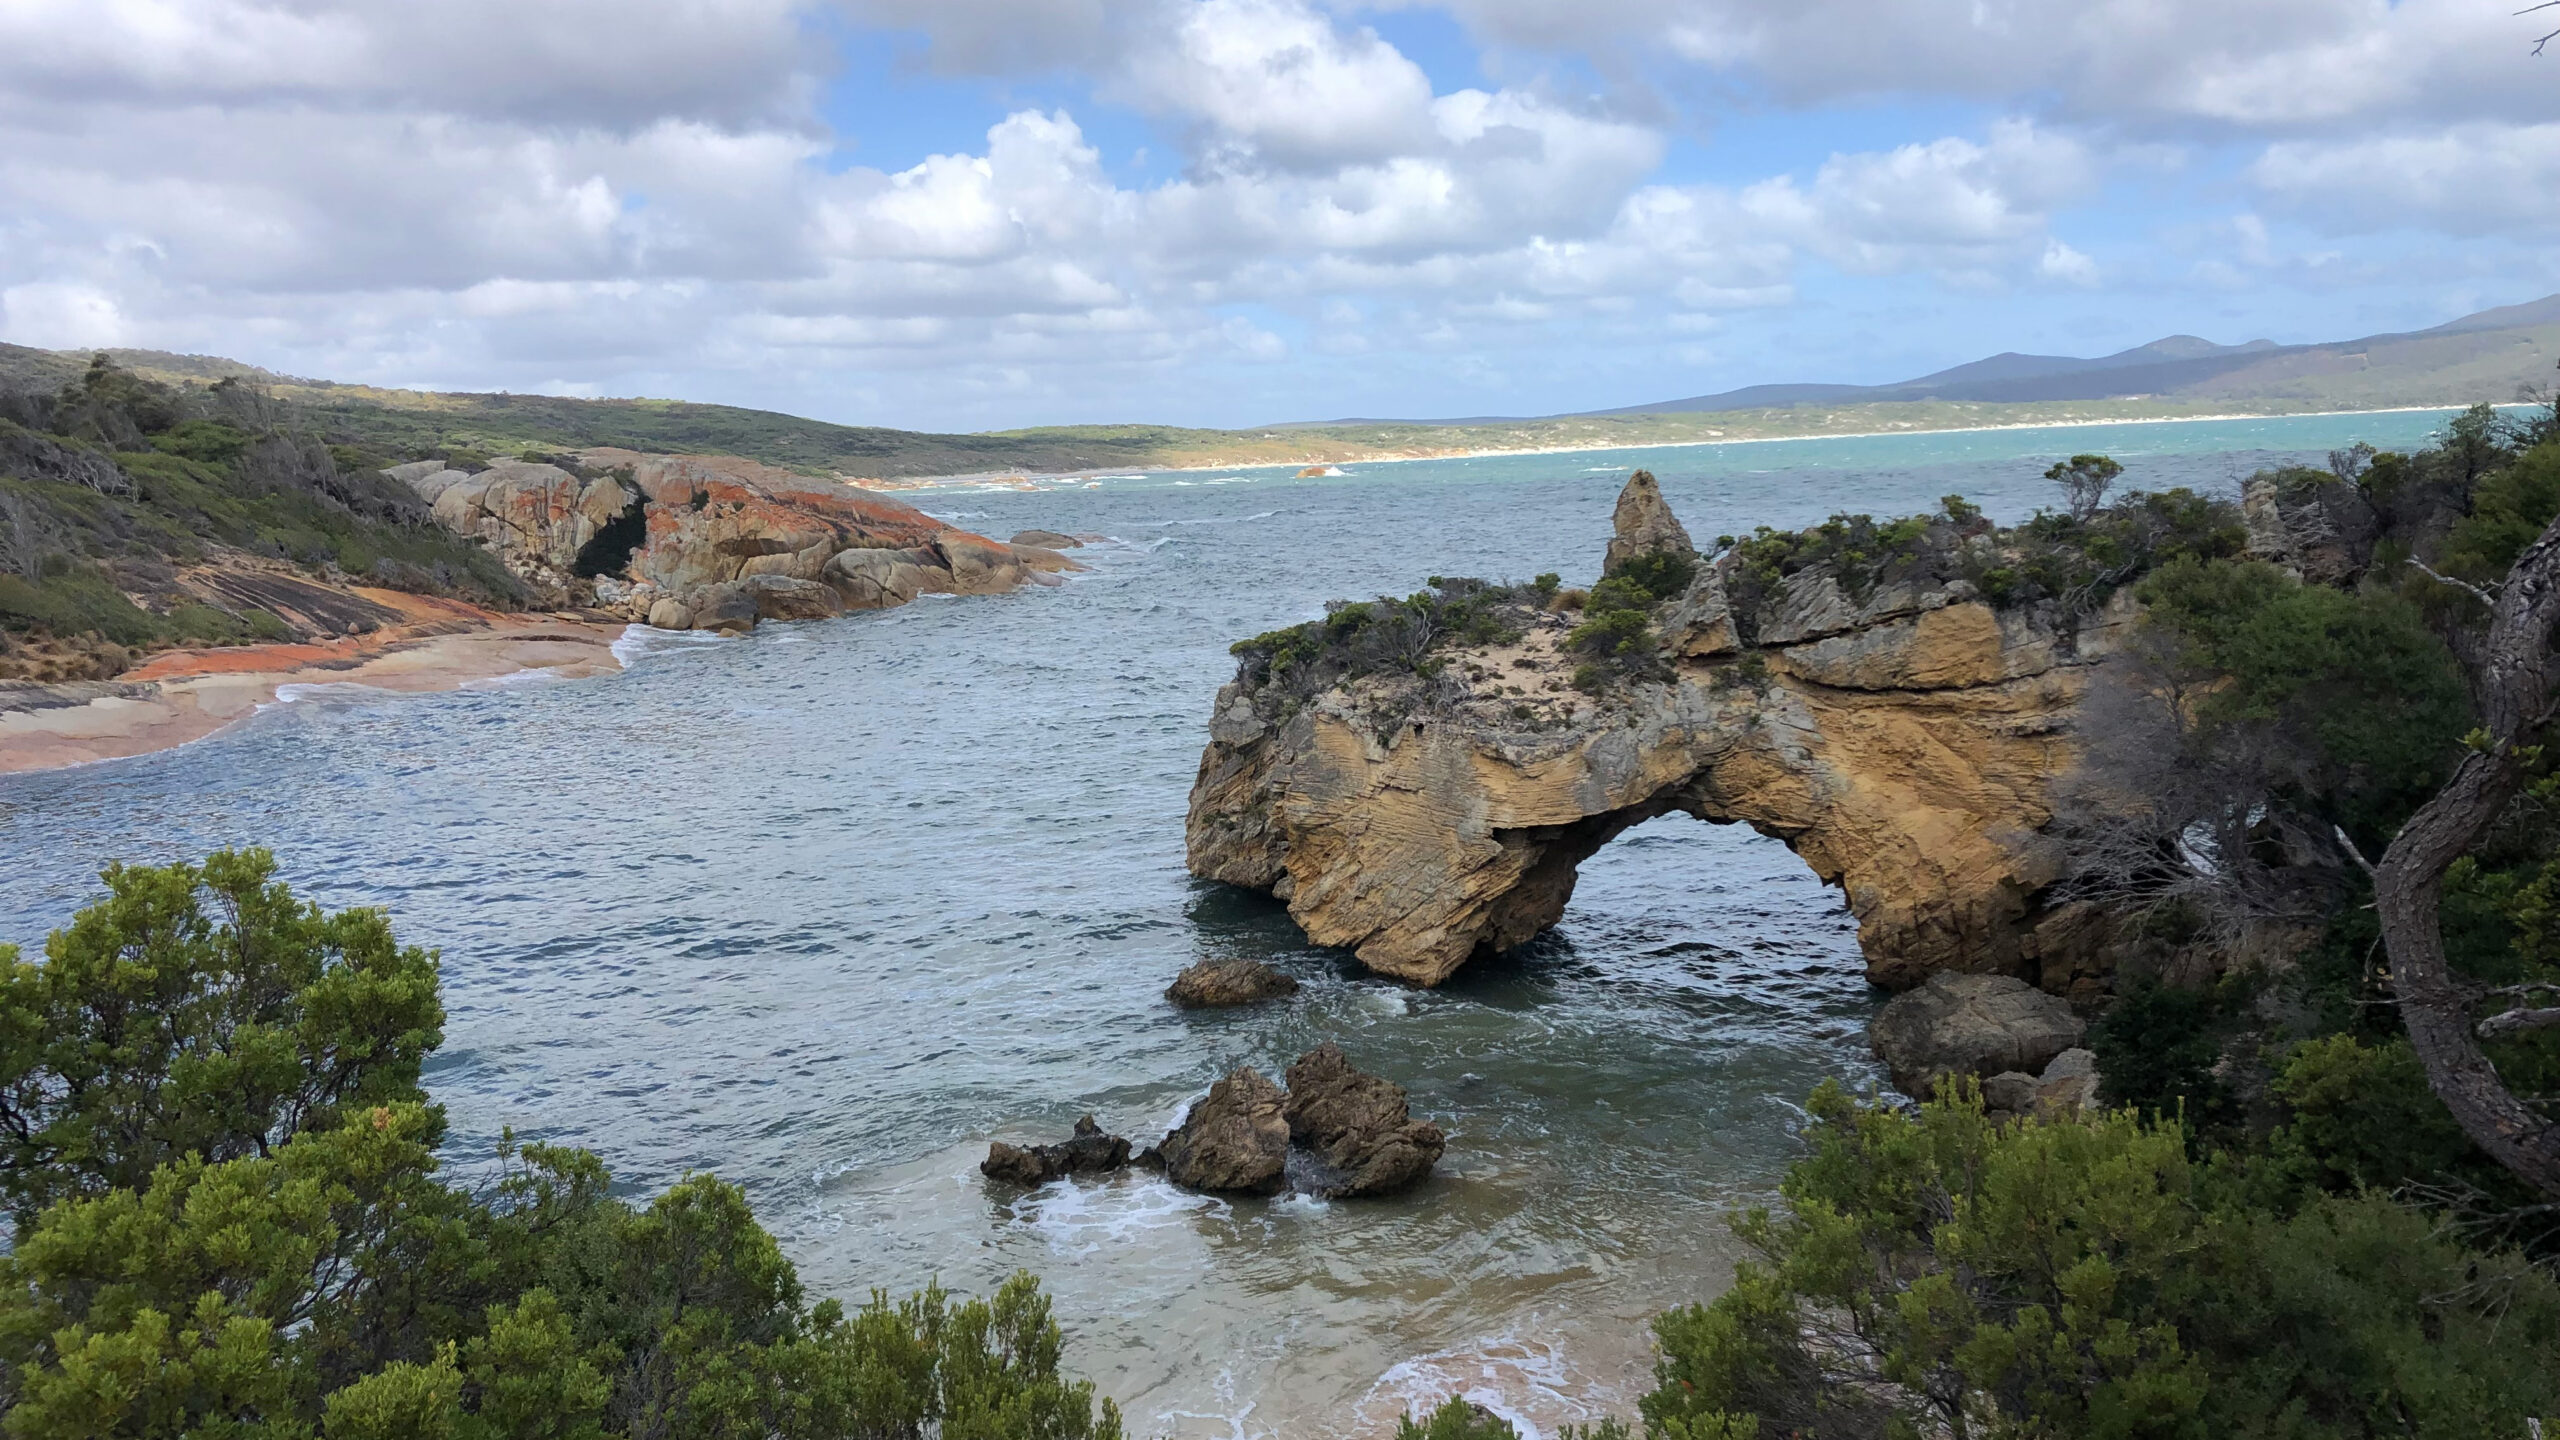 Views on the ocean with an arch